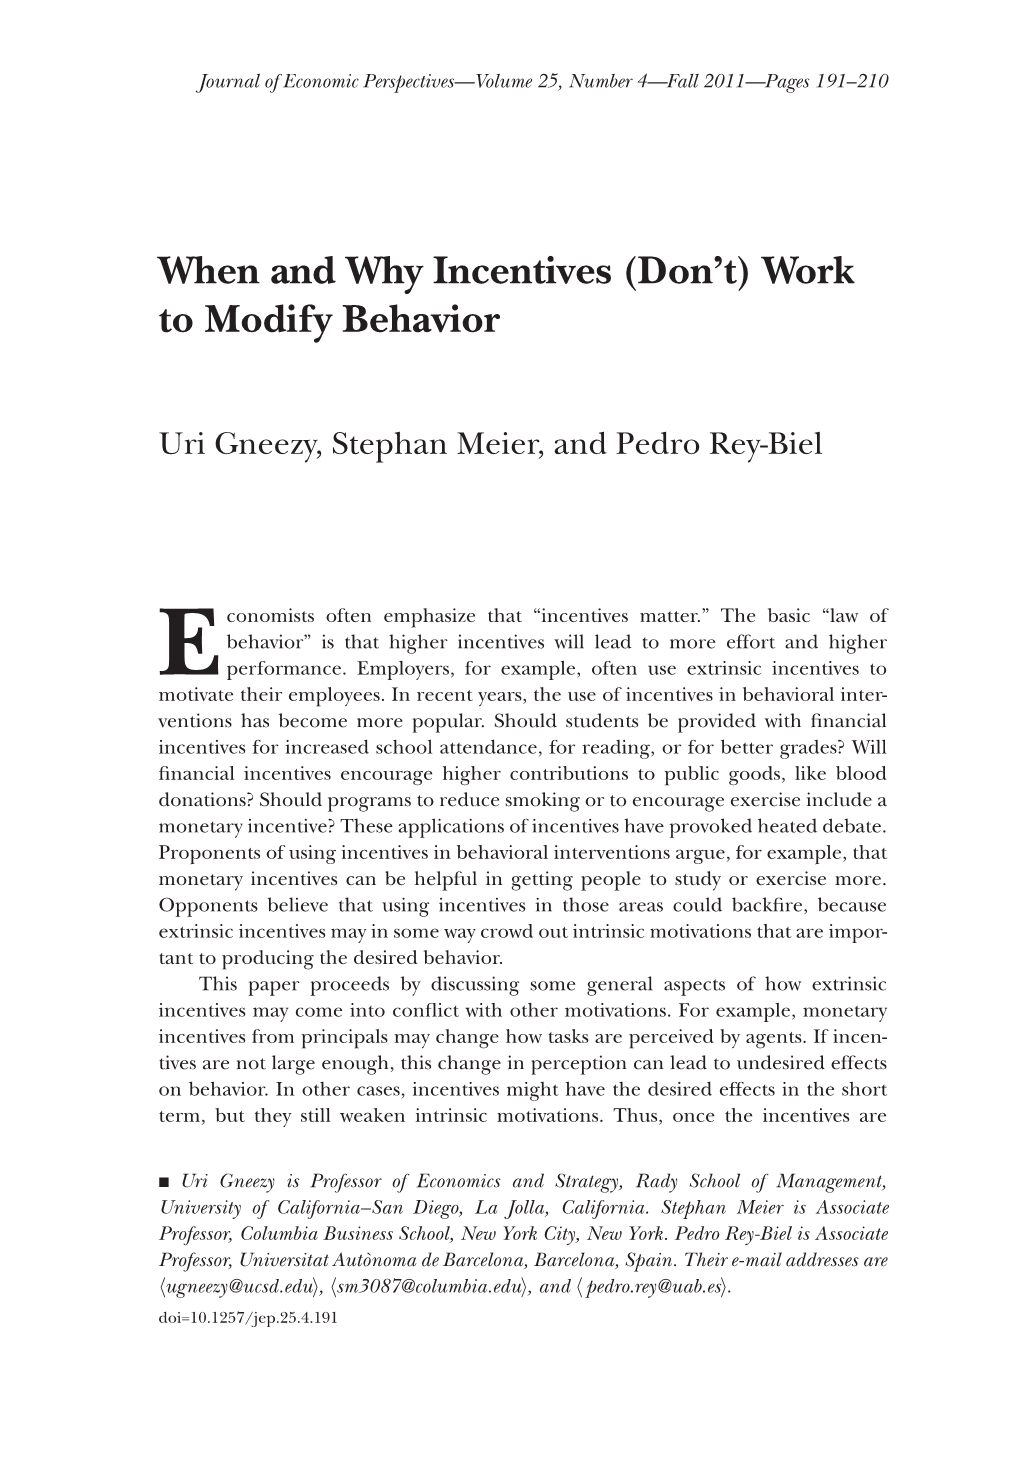 When and Why Incentives (Don't) Work to Modify Behavior